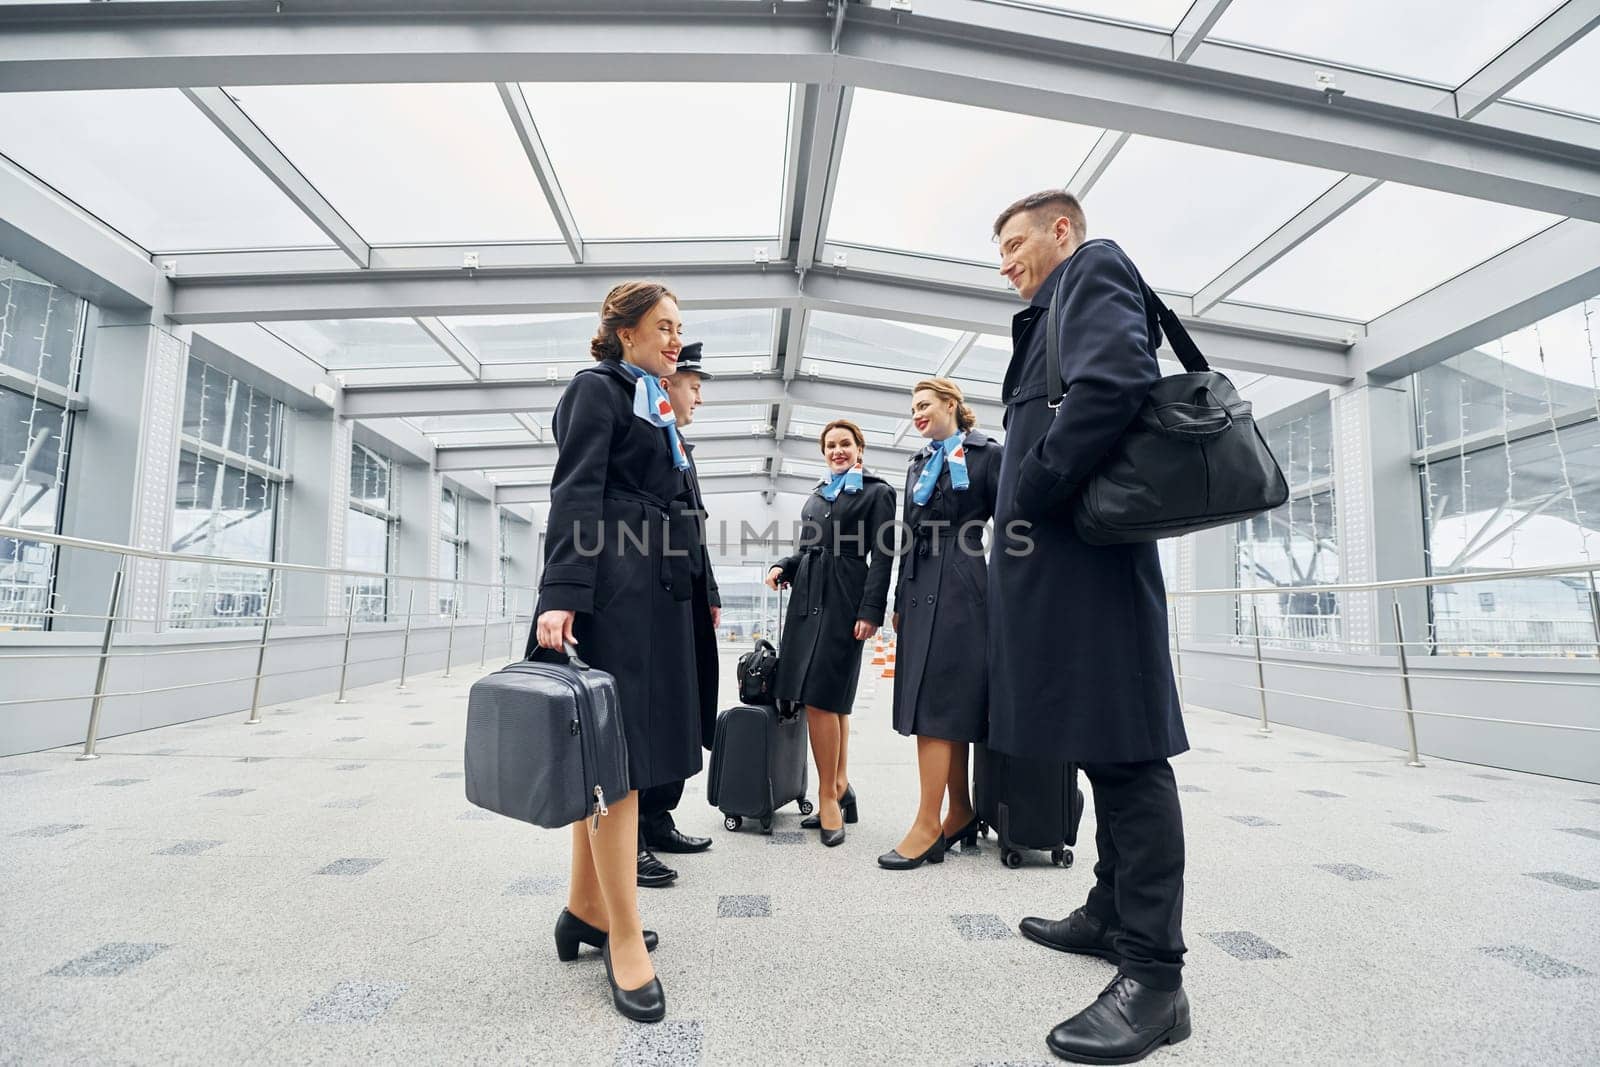 Airplane crew in uniform is going to the work together by Standret